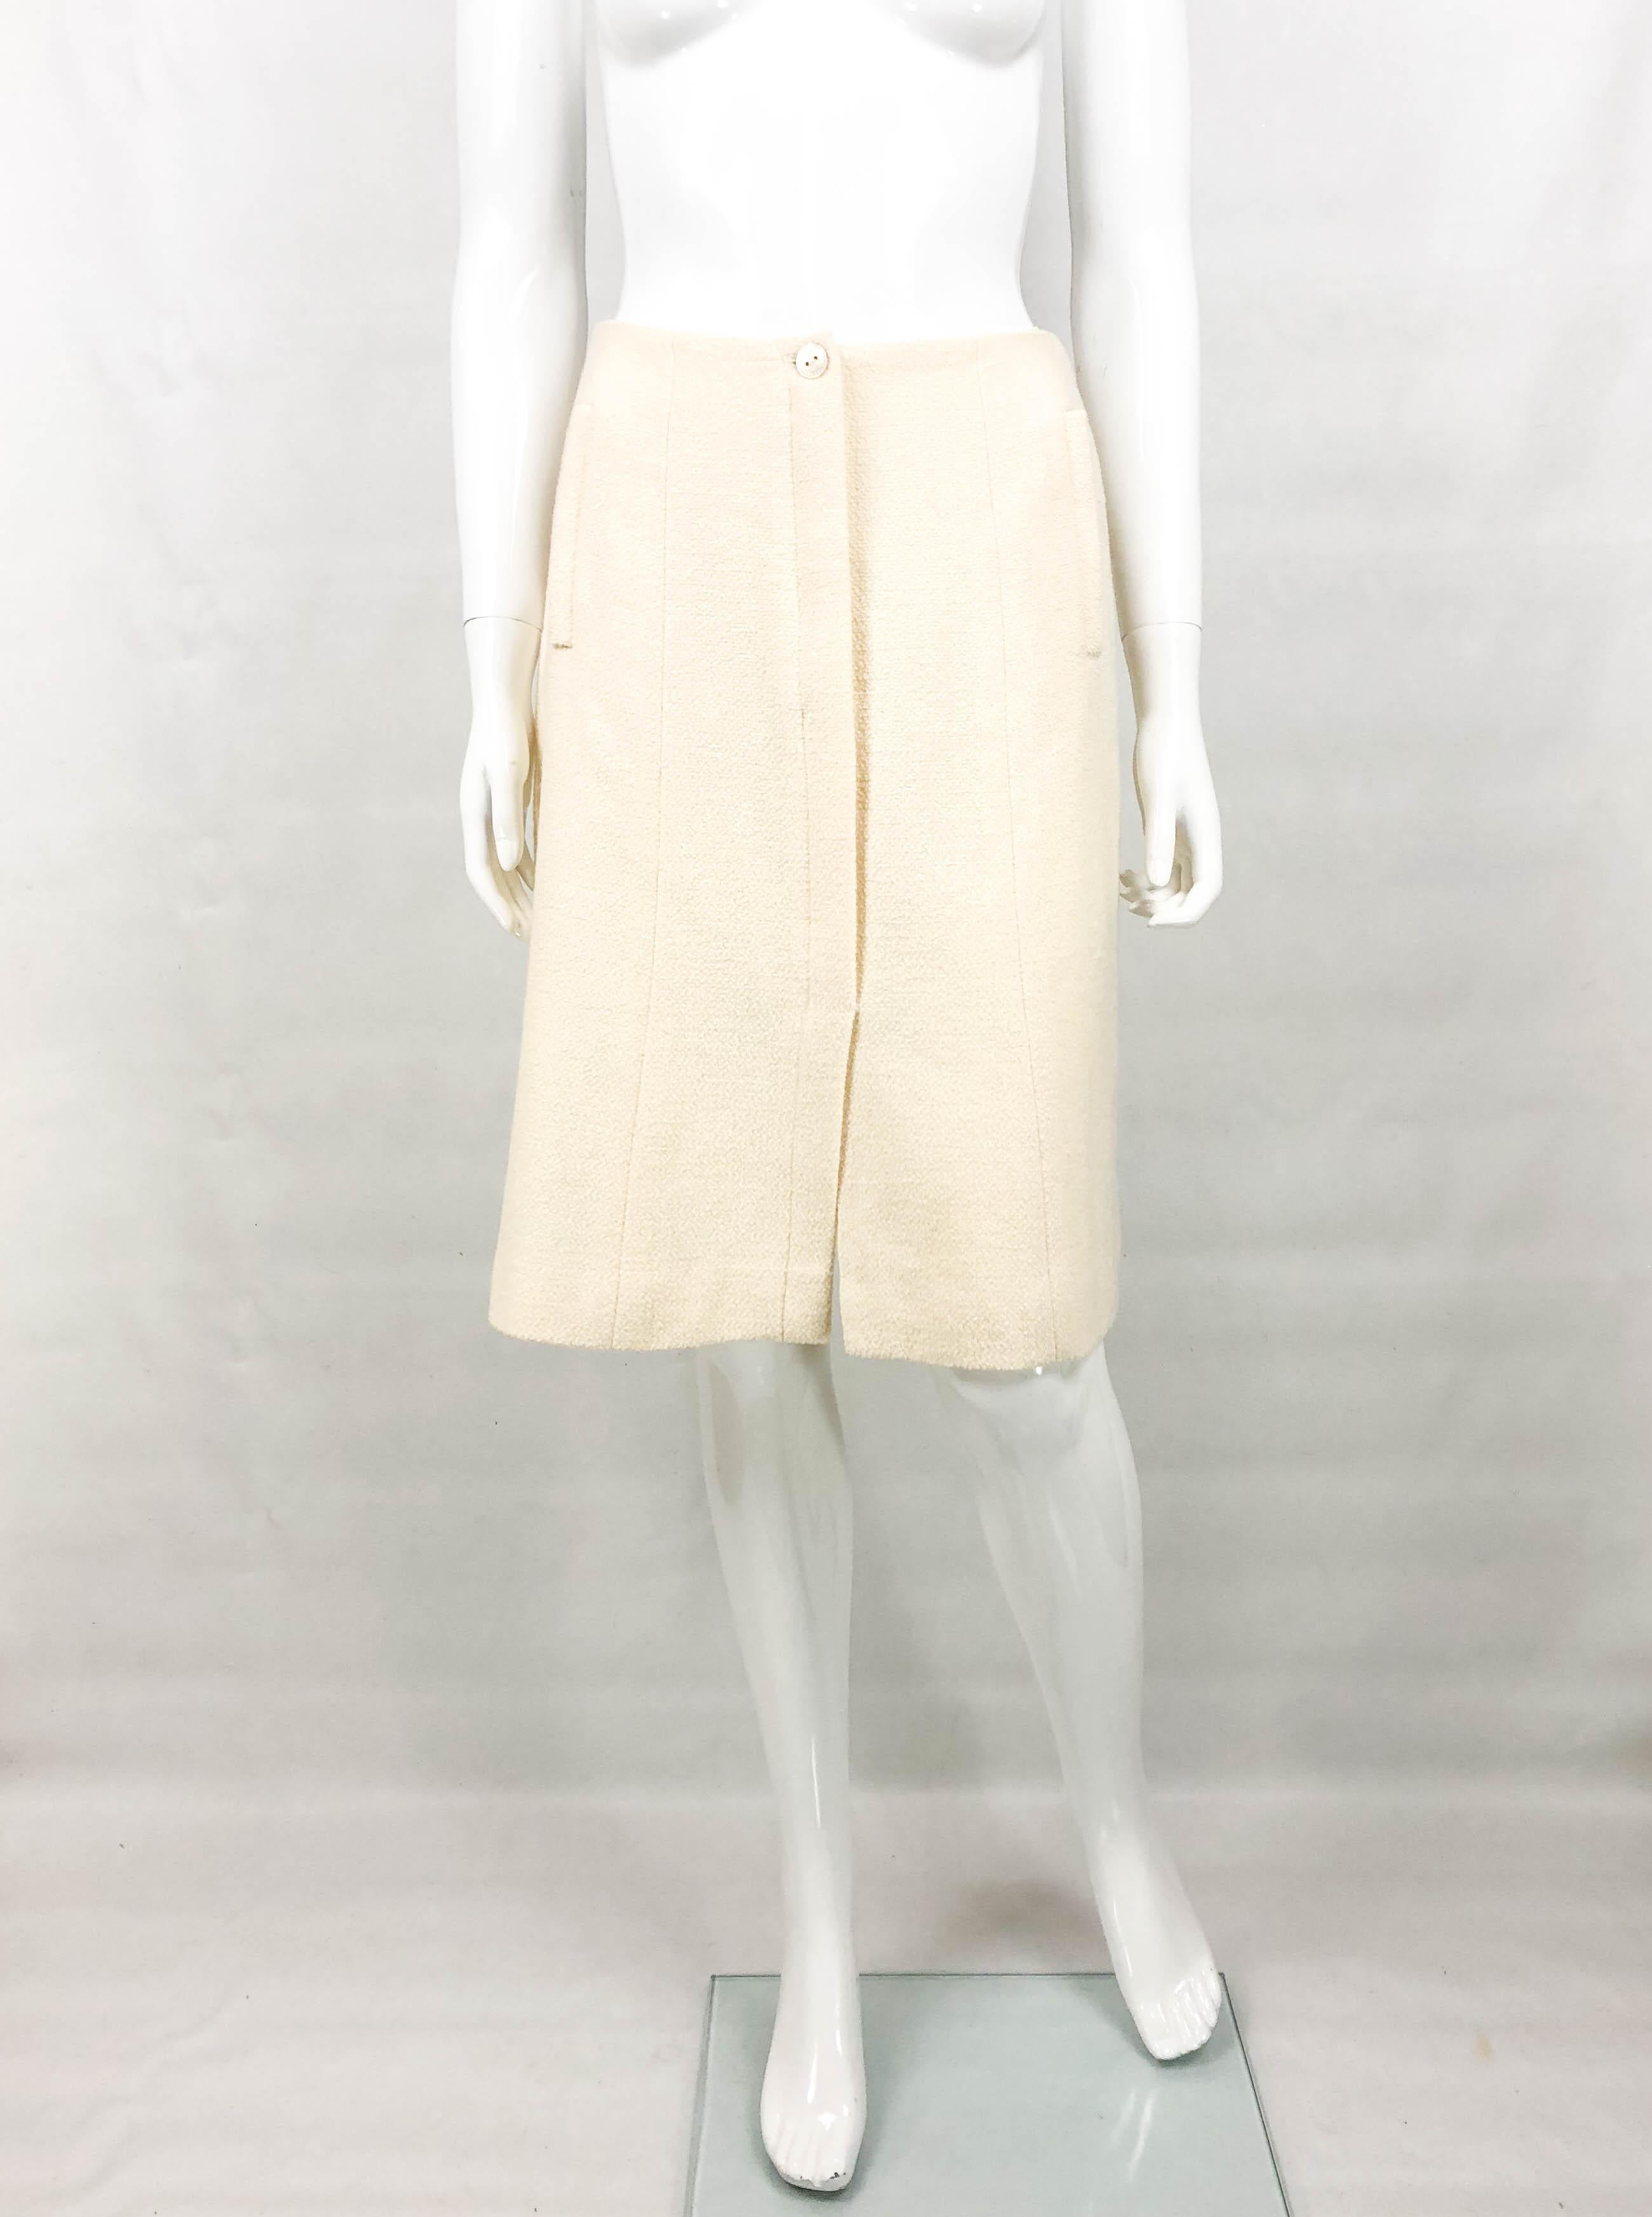 Chanel Vintage Cream Wool Skirt. This stylish skirt by Chanel is part of the 2003 Cruise collection. It is made in cream wool and it is lined in silk. A-line in shape, it hovers at knee height. It features a mother of pearl button saying Chanel